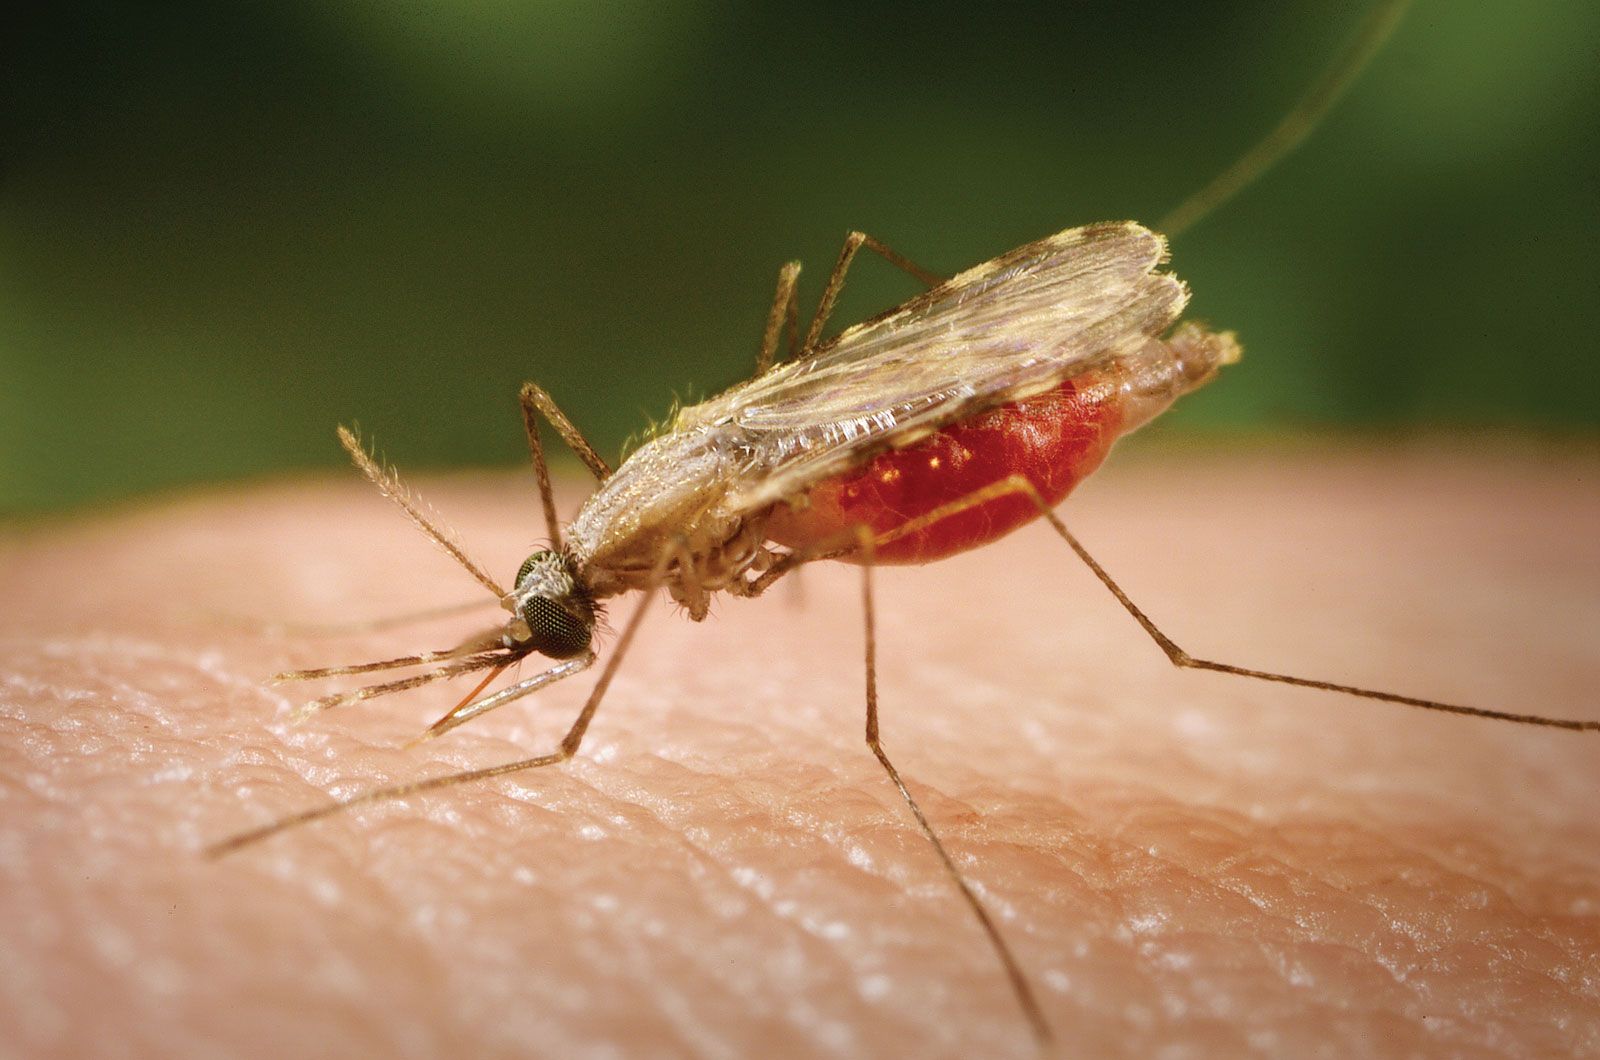 where does malaria come from and how does malaria spread